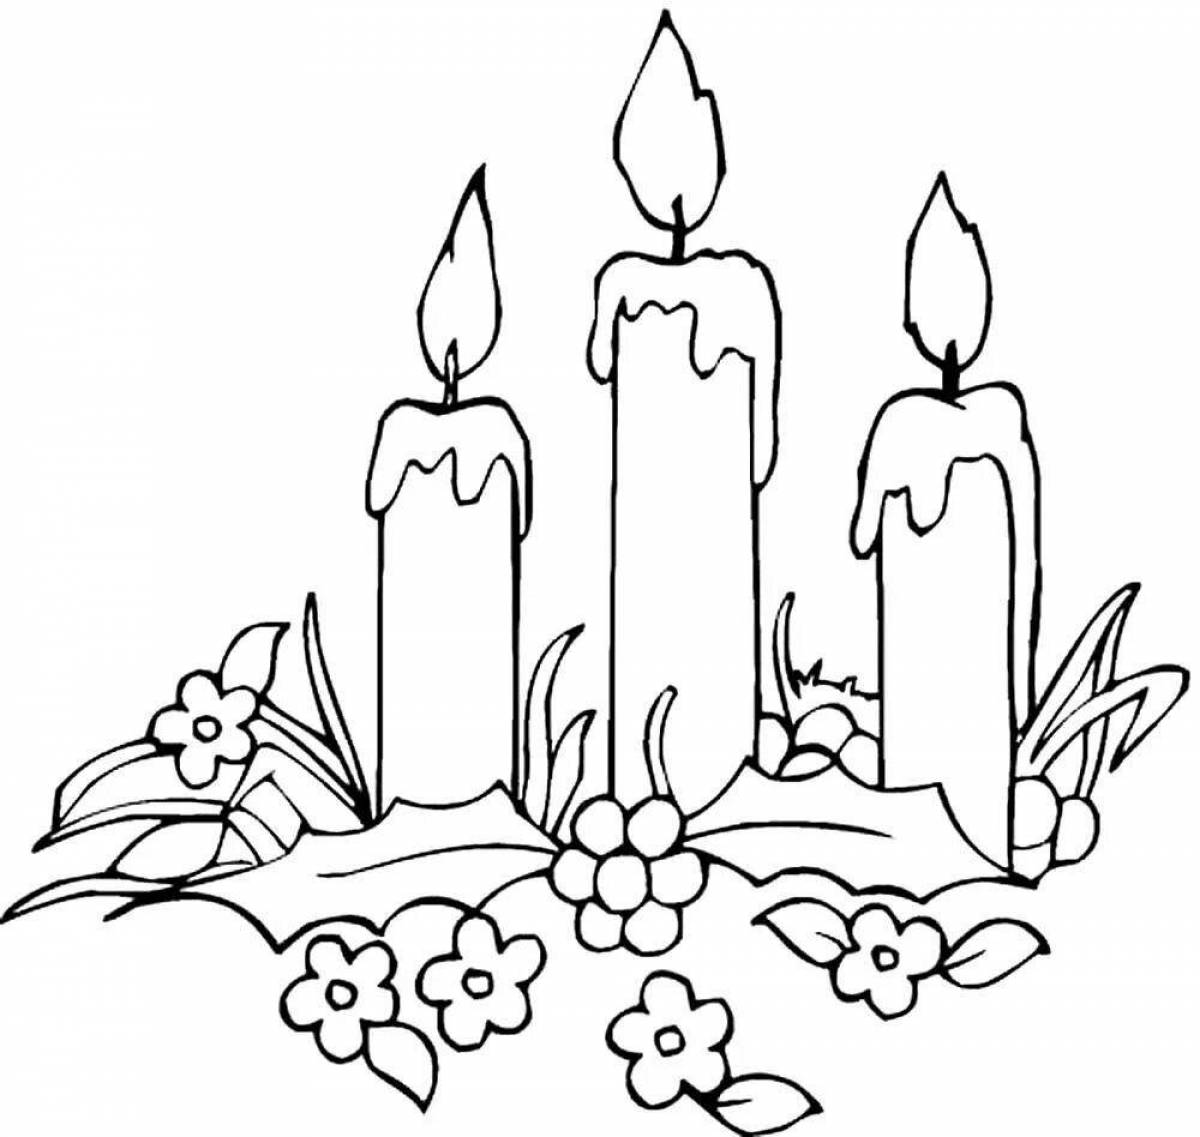 Dazzling memory candle coloring page